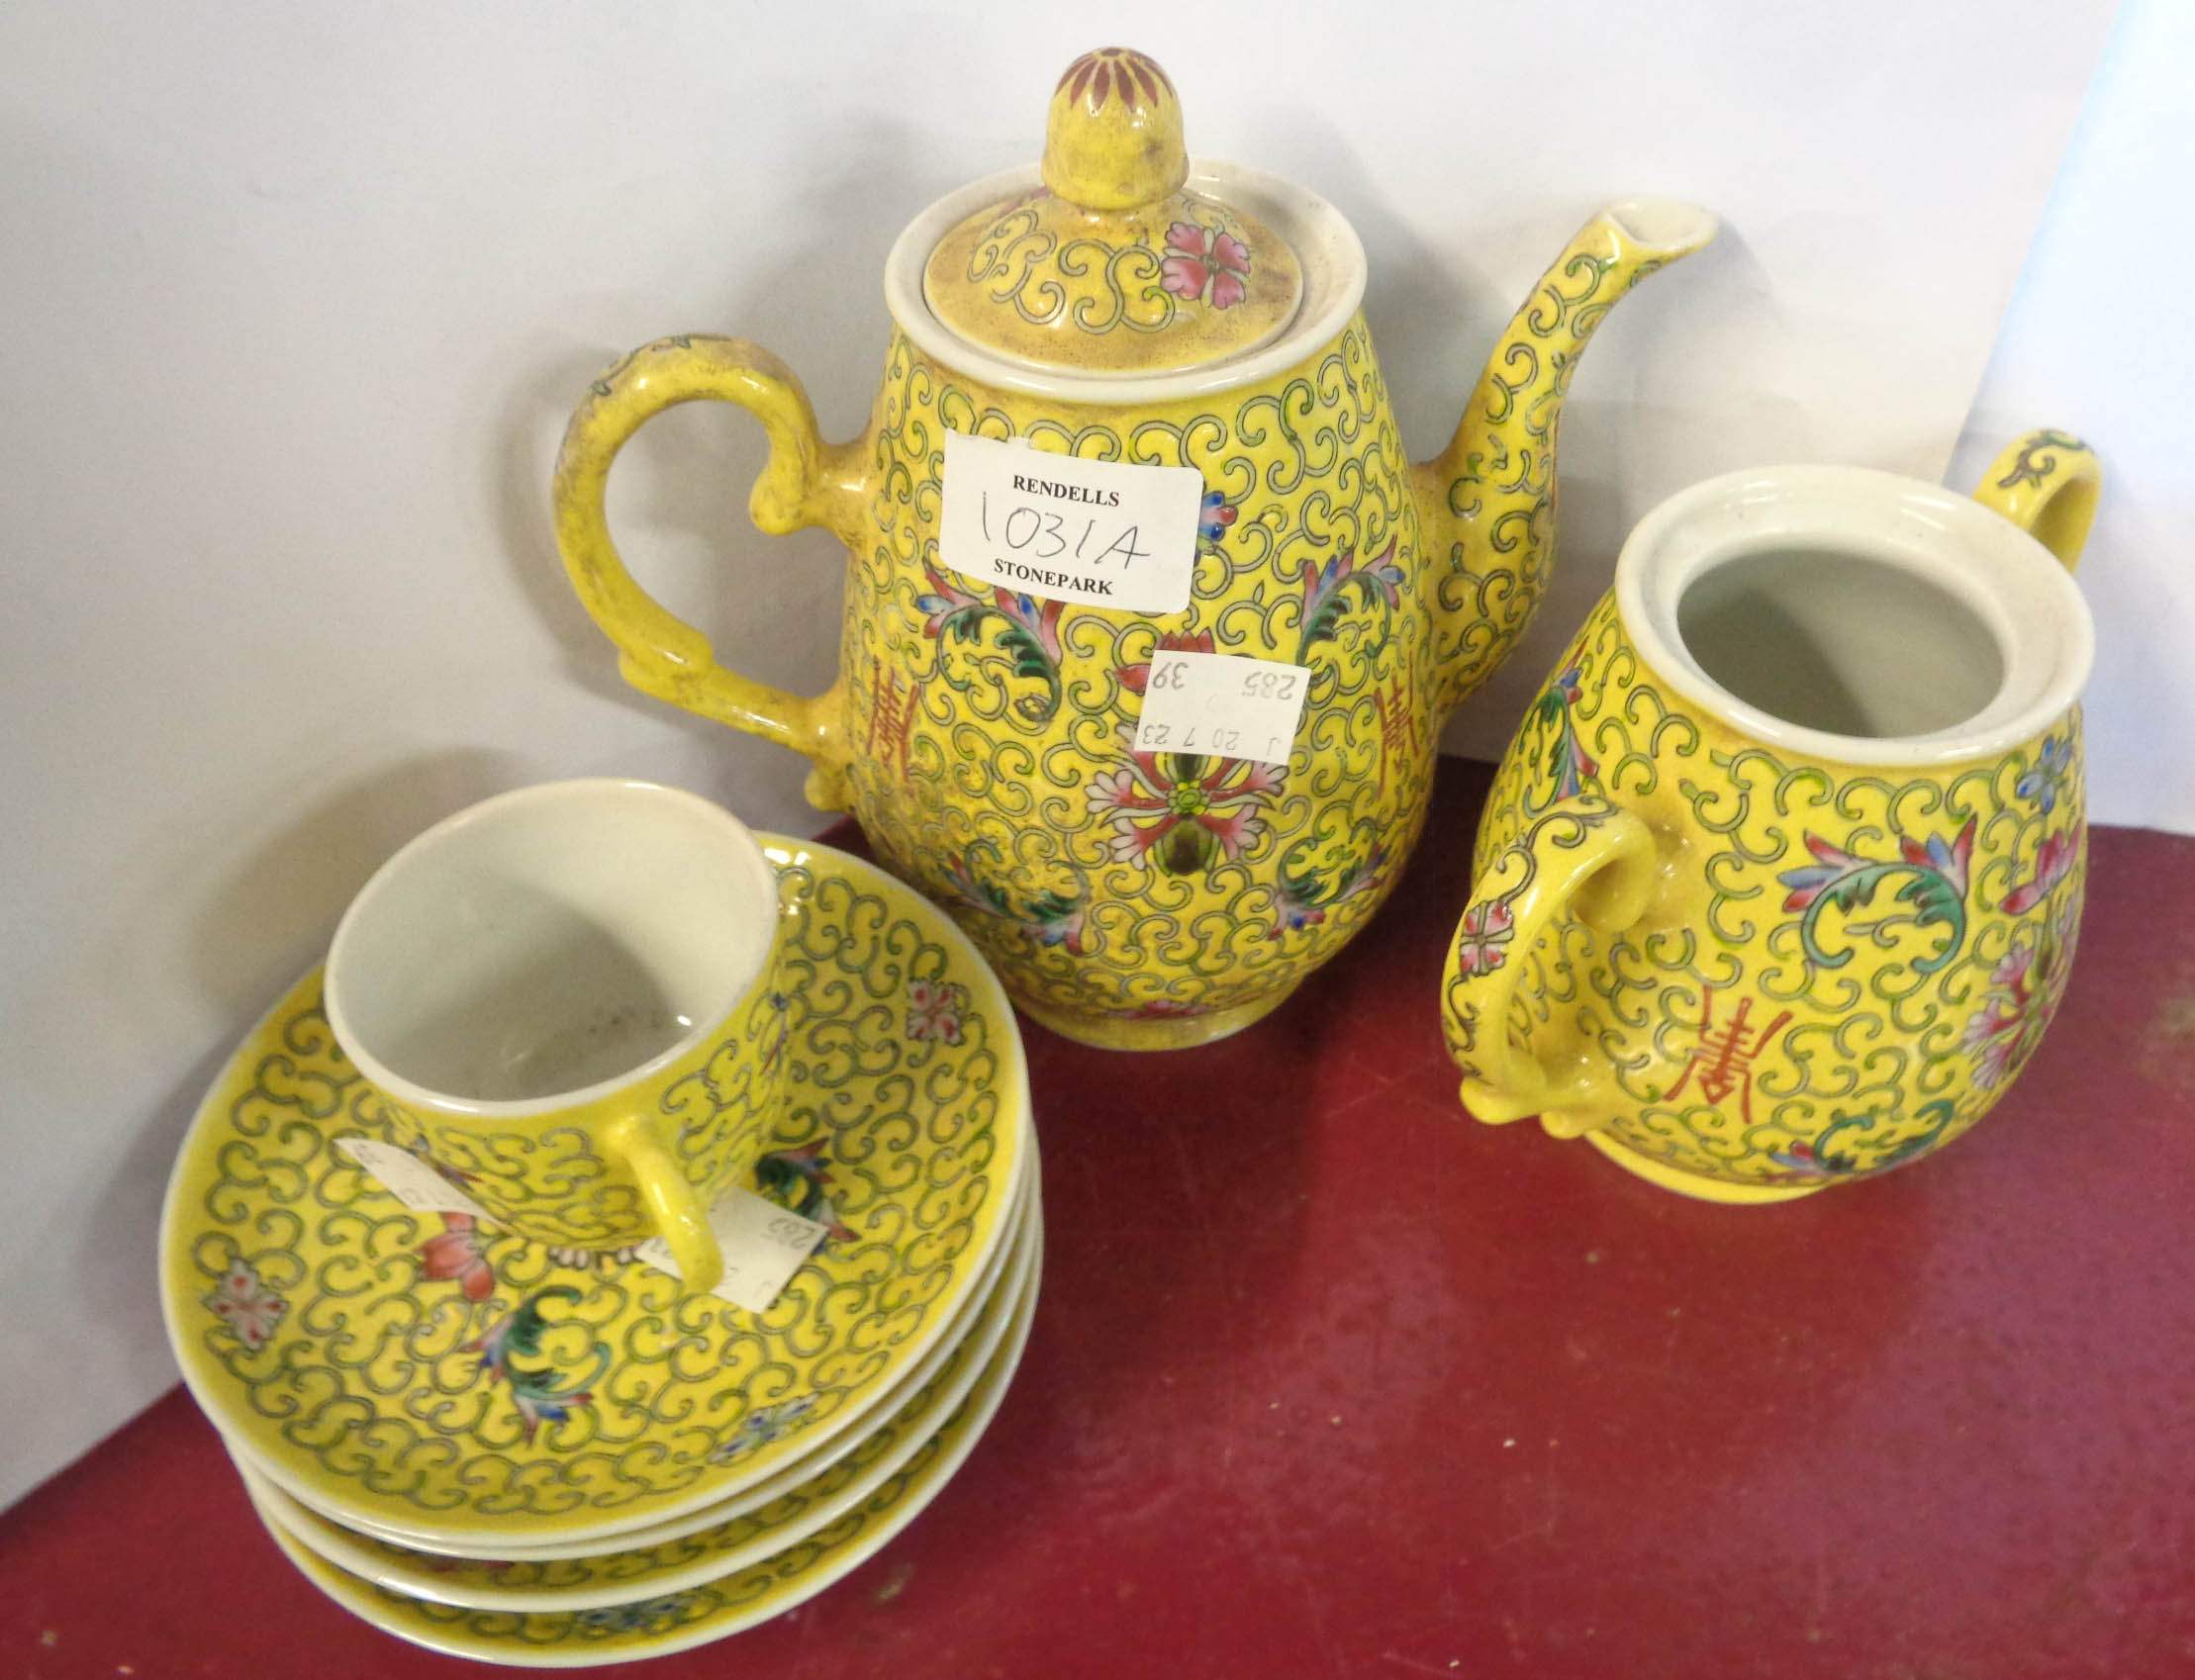 A 20th Century Chinese porcelain part tea set with enamelled decoration on a yellow ground